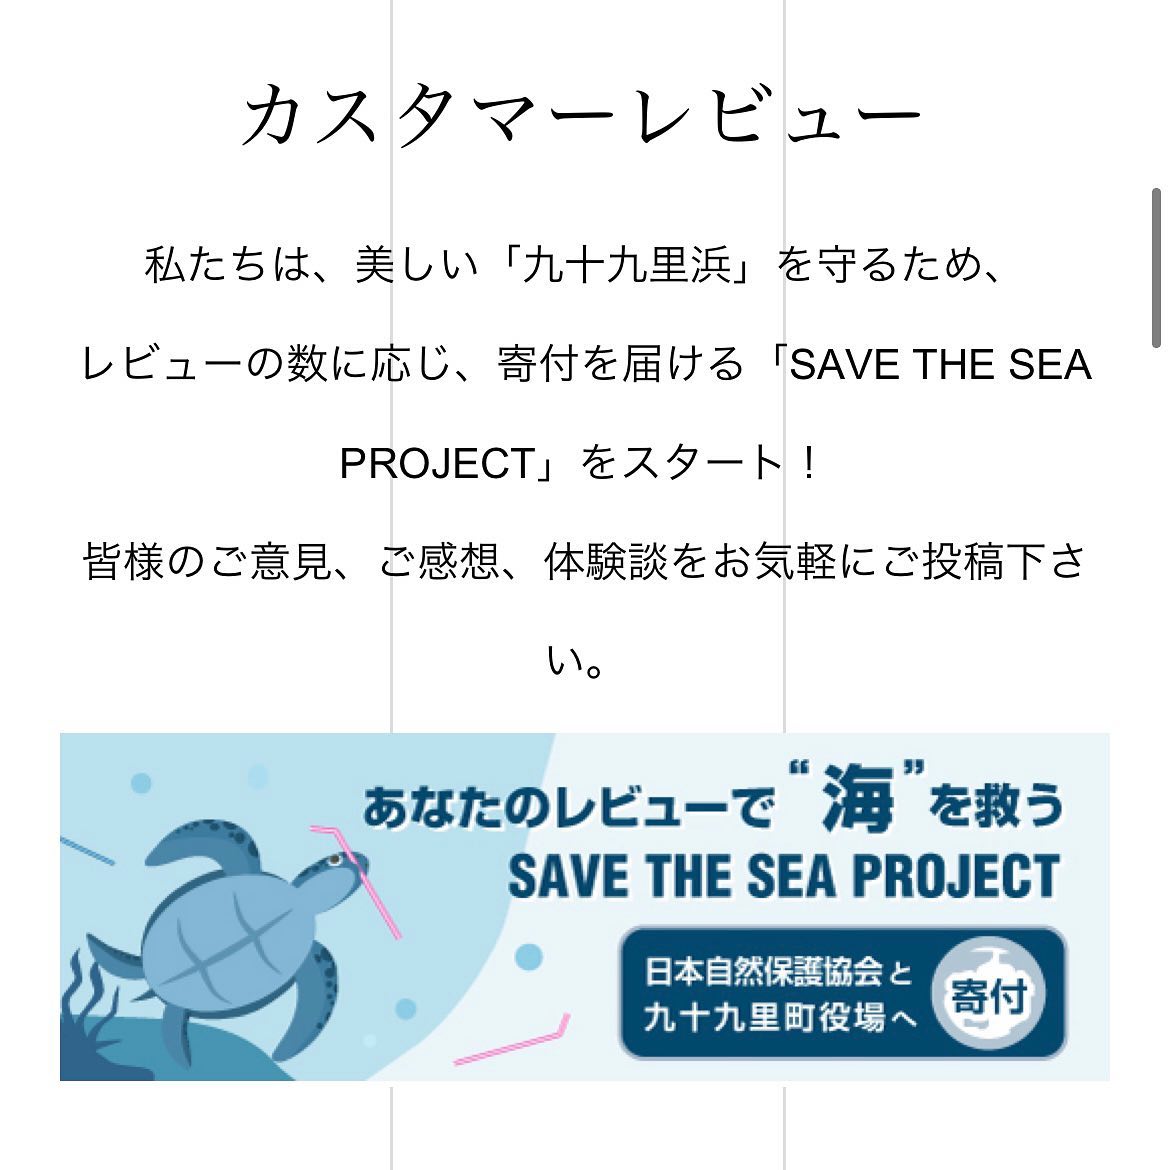 「SAVE THE SEA PROJECT」スタート！